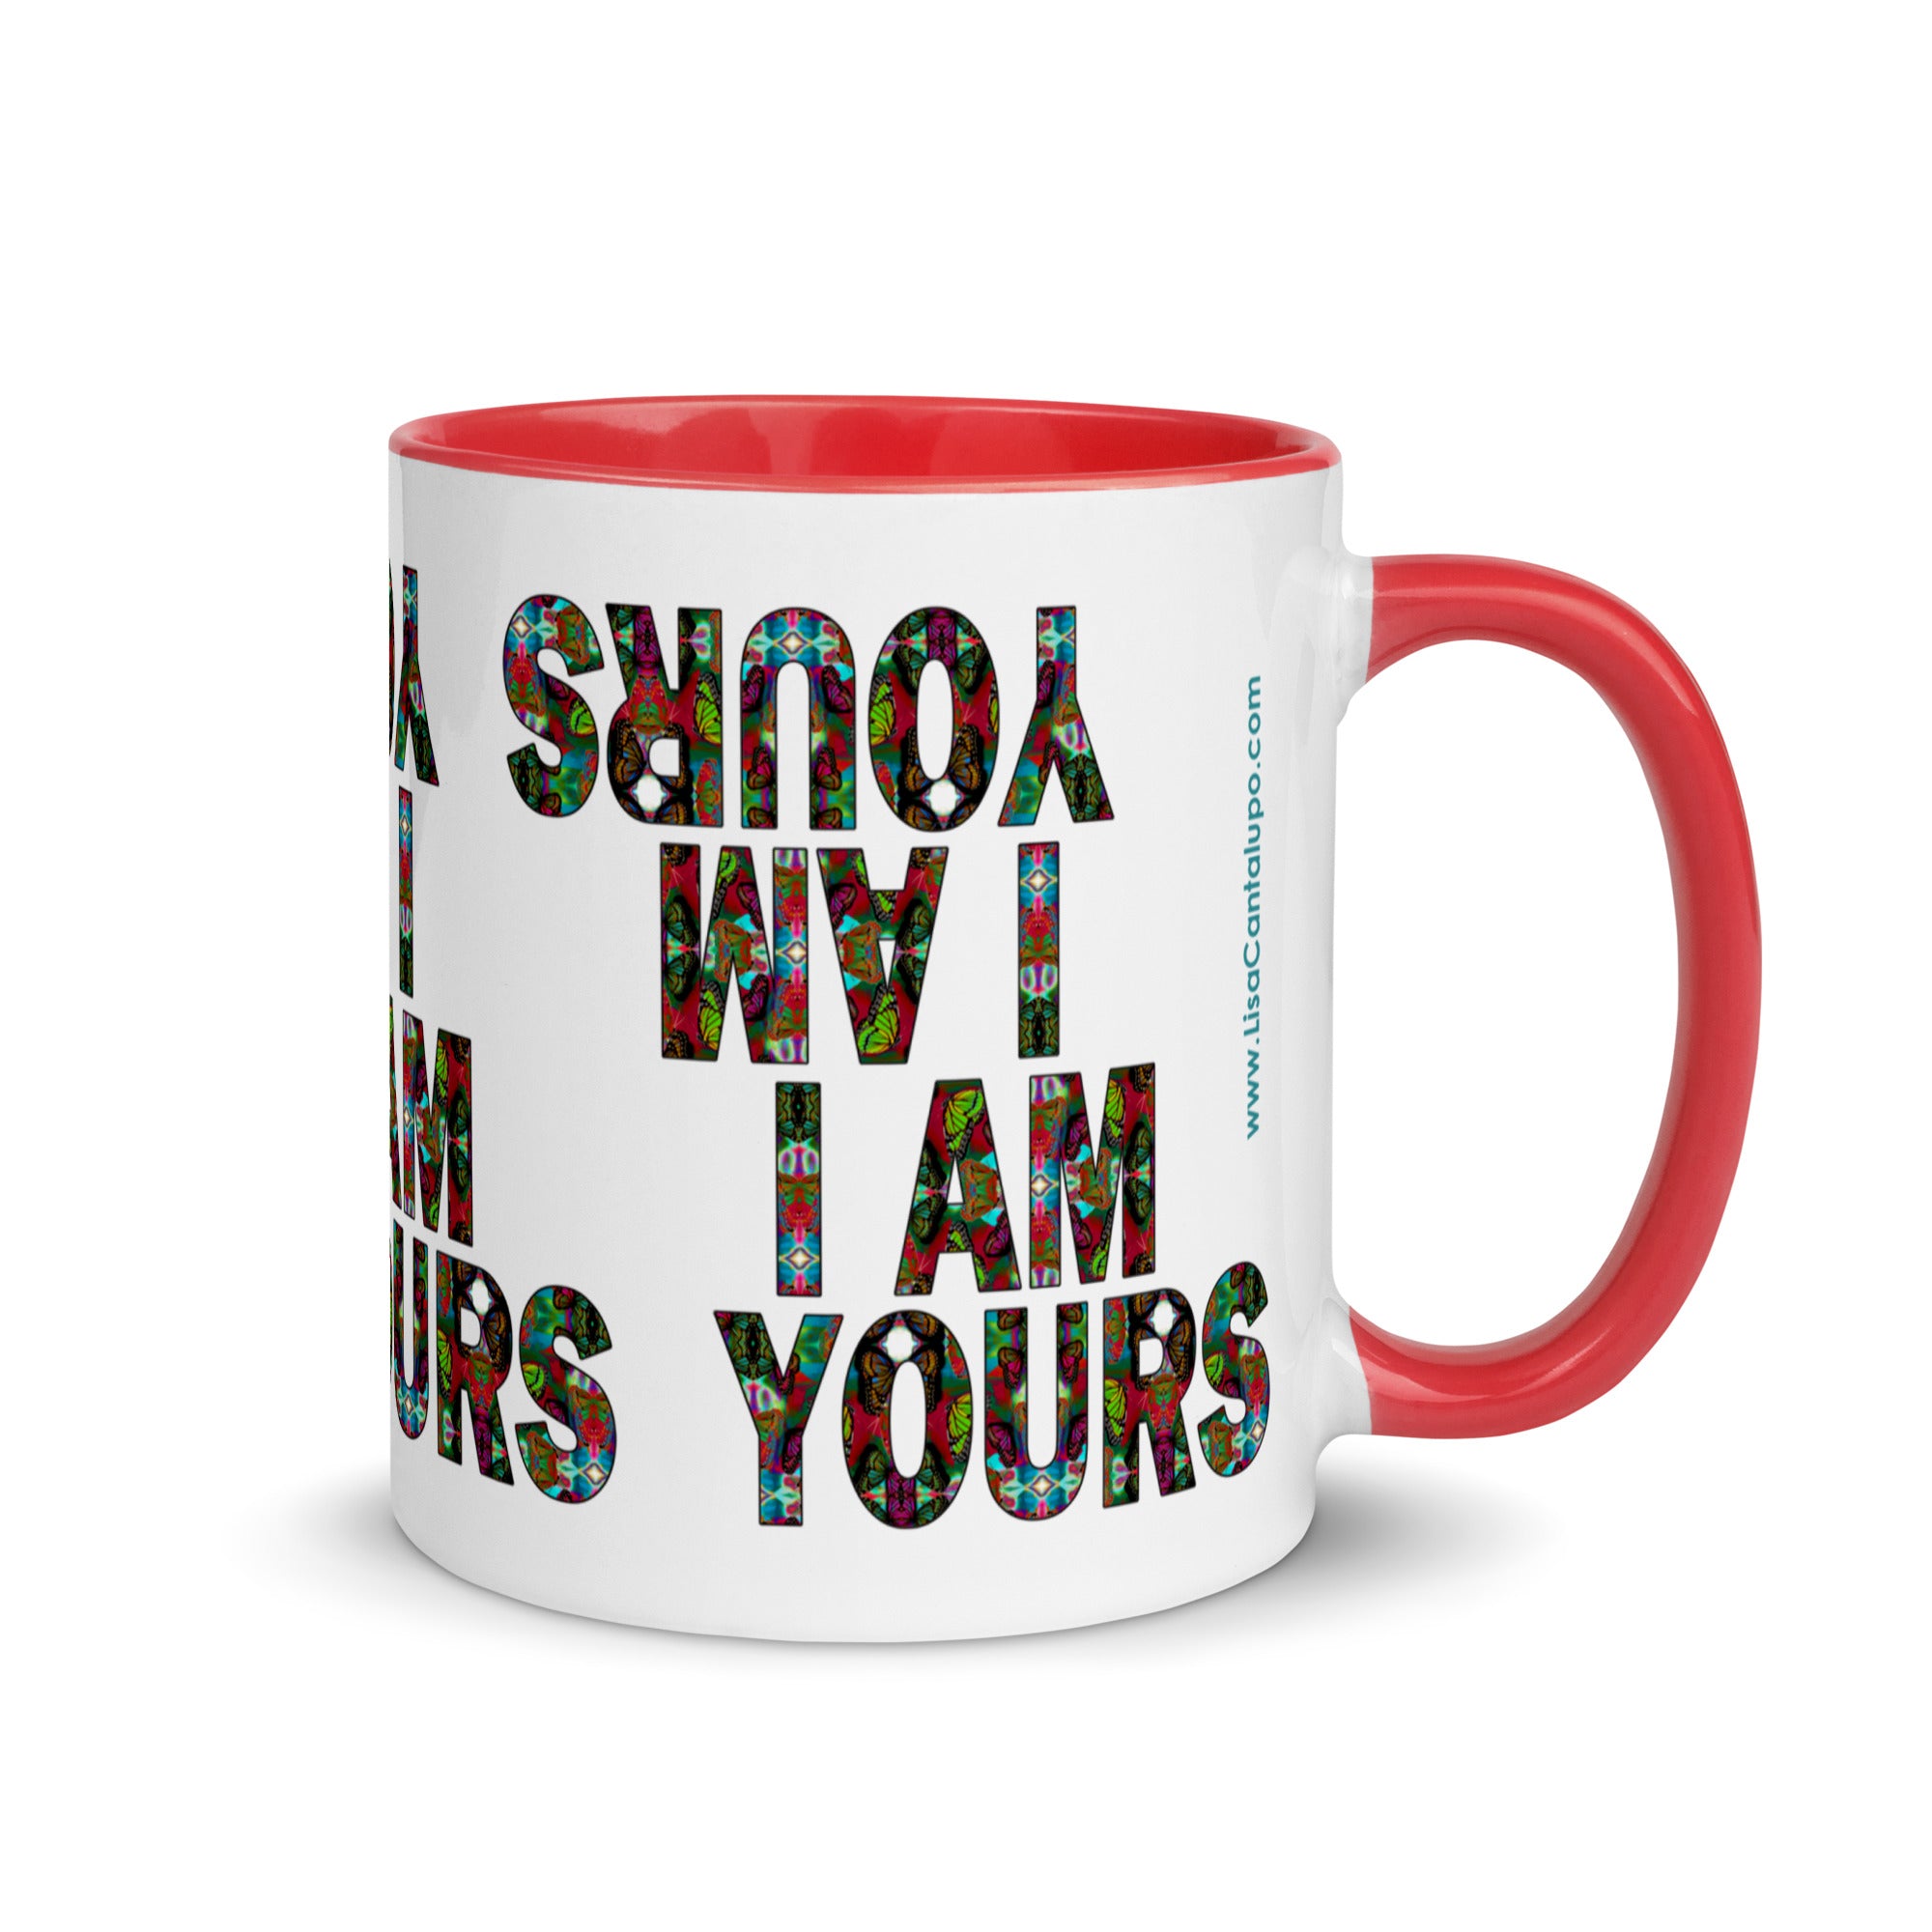 I am yours ~ LOVE ETERNAL Ceramic Mug; Colorful Butterflies Print, Red Handle Inside & Trim, Valentine's Day Gift